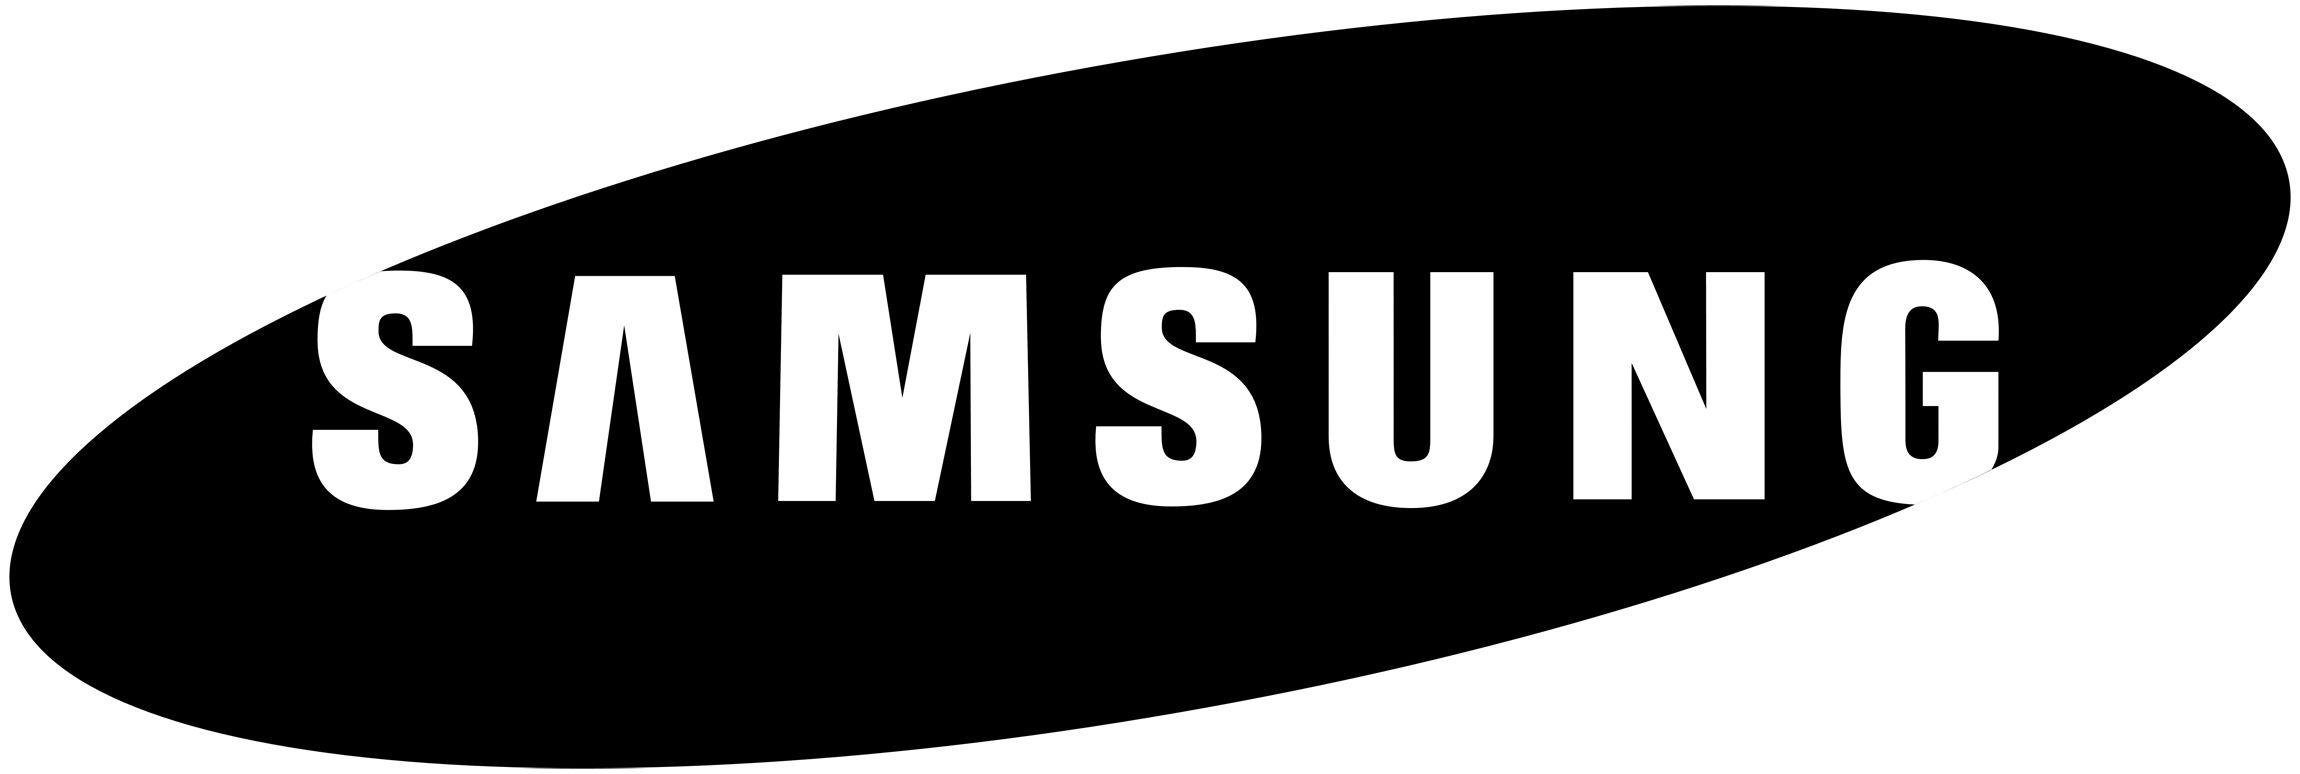 New Samsung Logo - Samsung Logo, Samsung Symbol, Meaning, History and Evolution